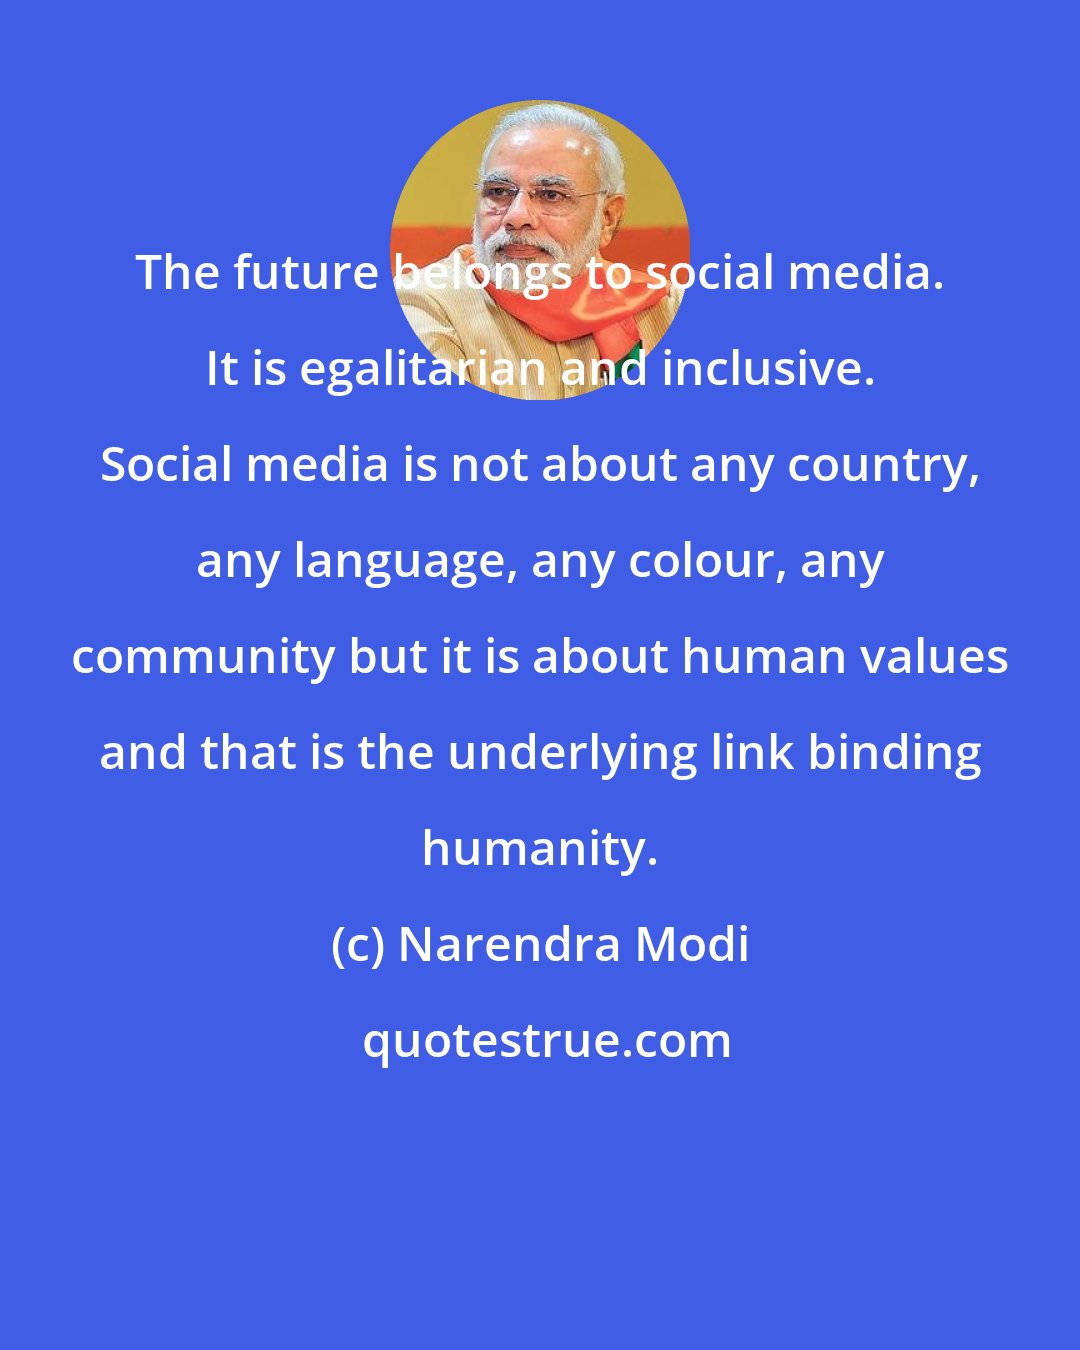 Narendra Modi: The future belongs to social media. It is egalitarian and inclusive. Social media is not about any country, any language, any colour, any community but it is about human values and that is the underlying link binding humanity.